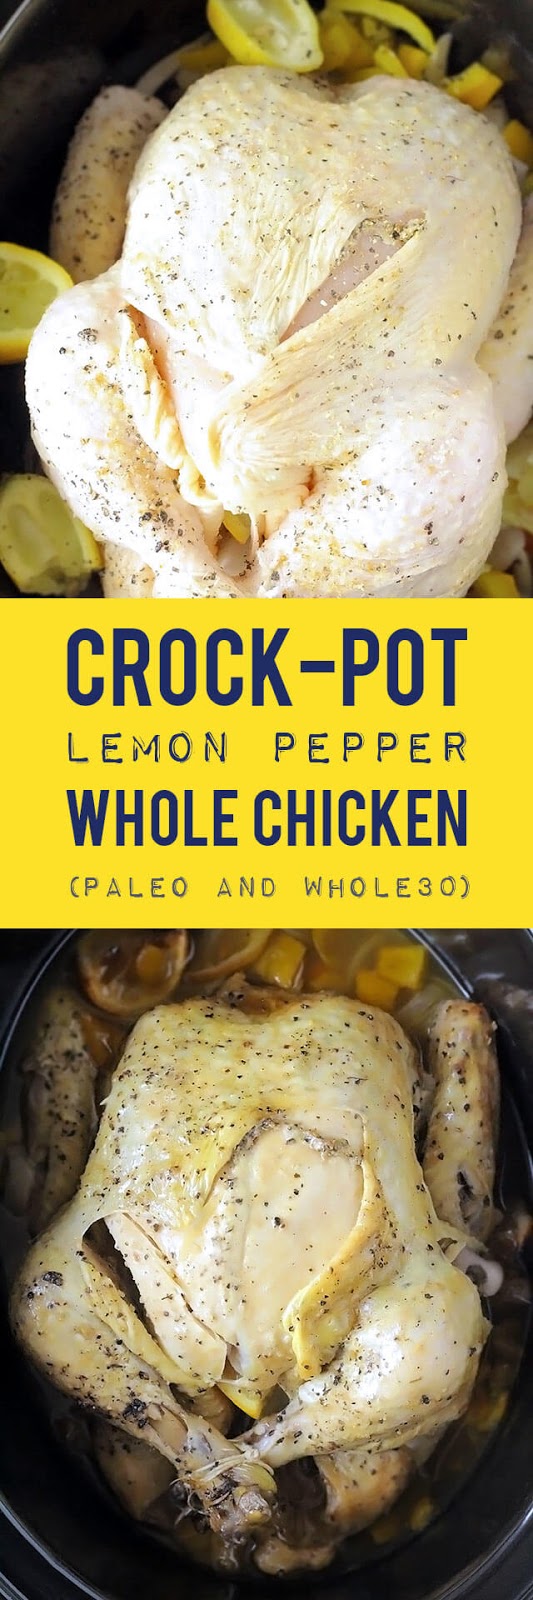 Slow Cooker Lemon Pepper Whole Chicken | The Rising Spoon